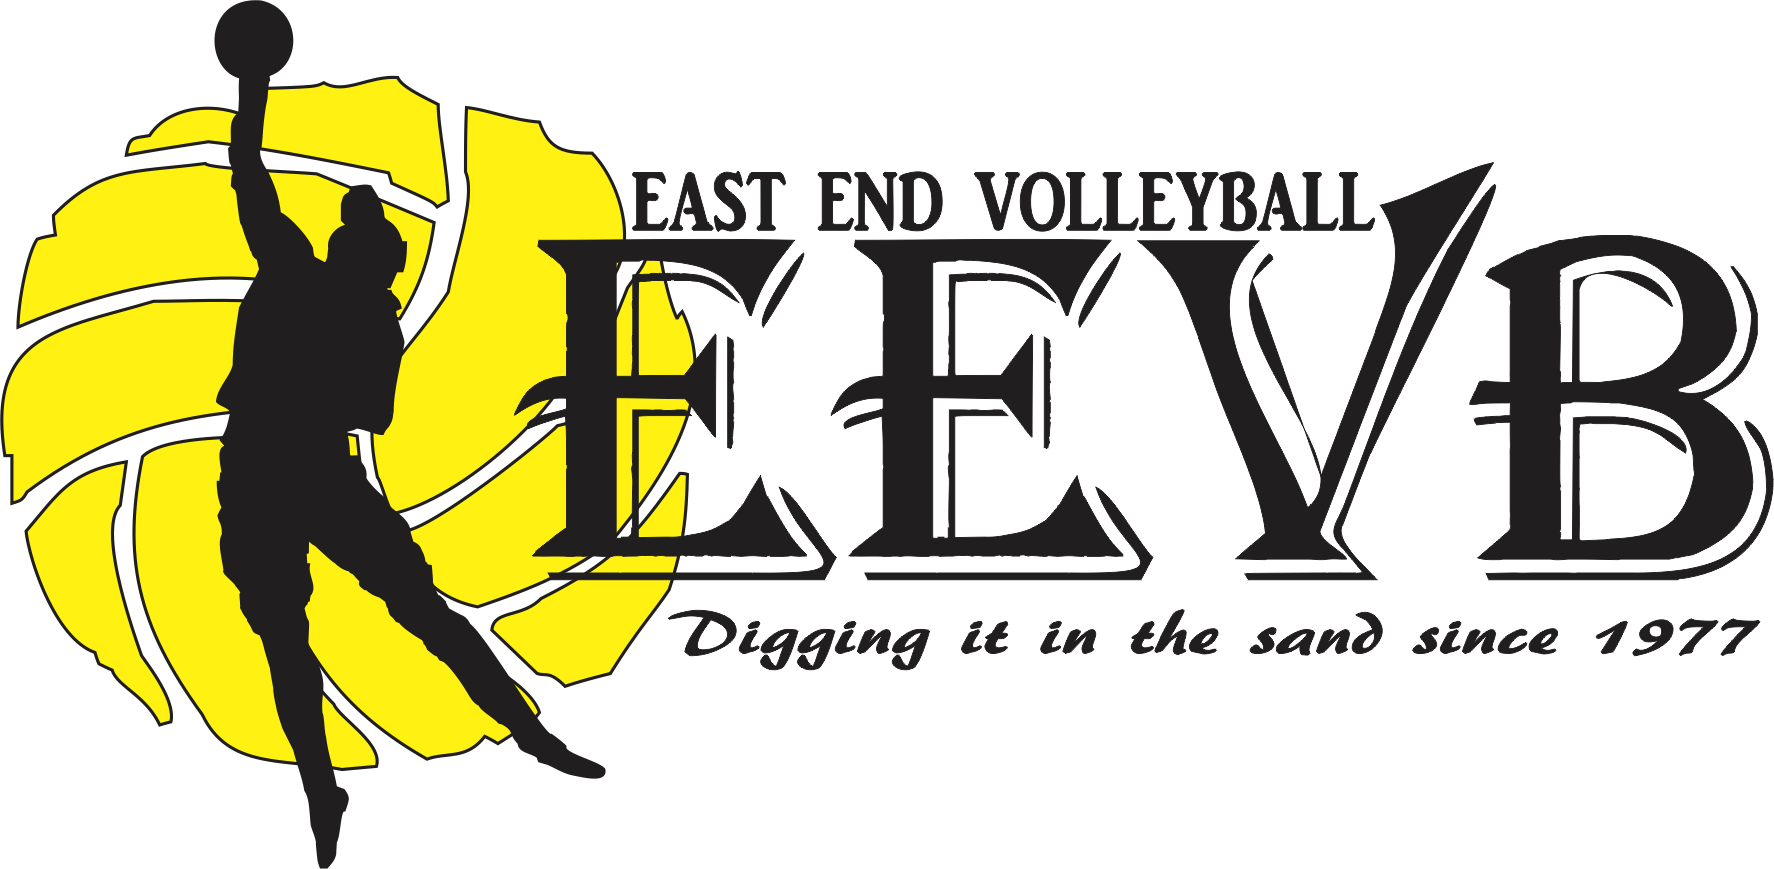 East End Volleyball